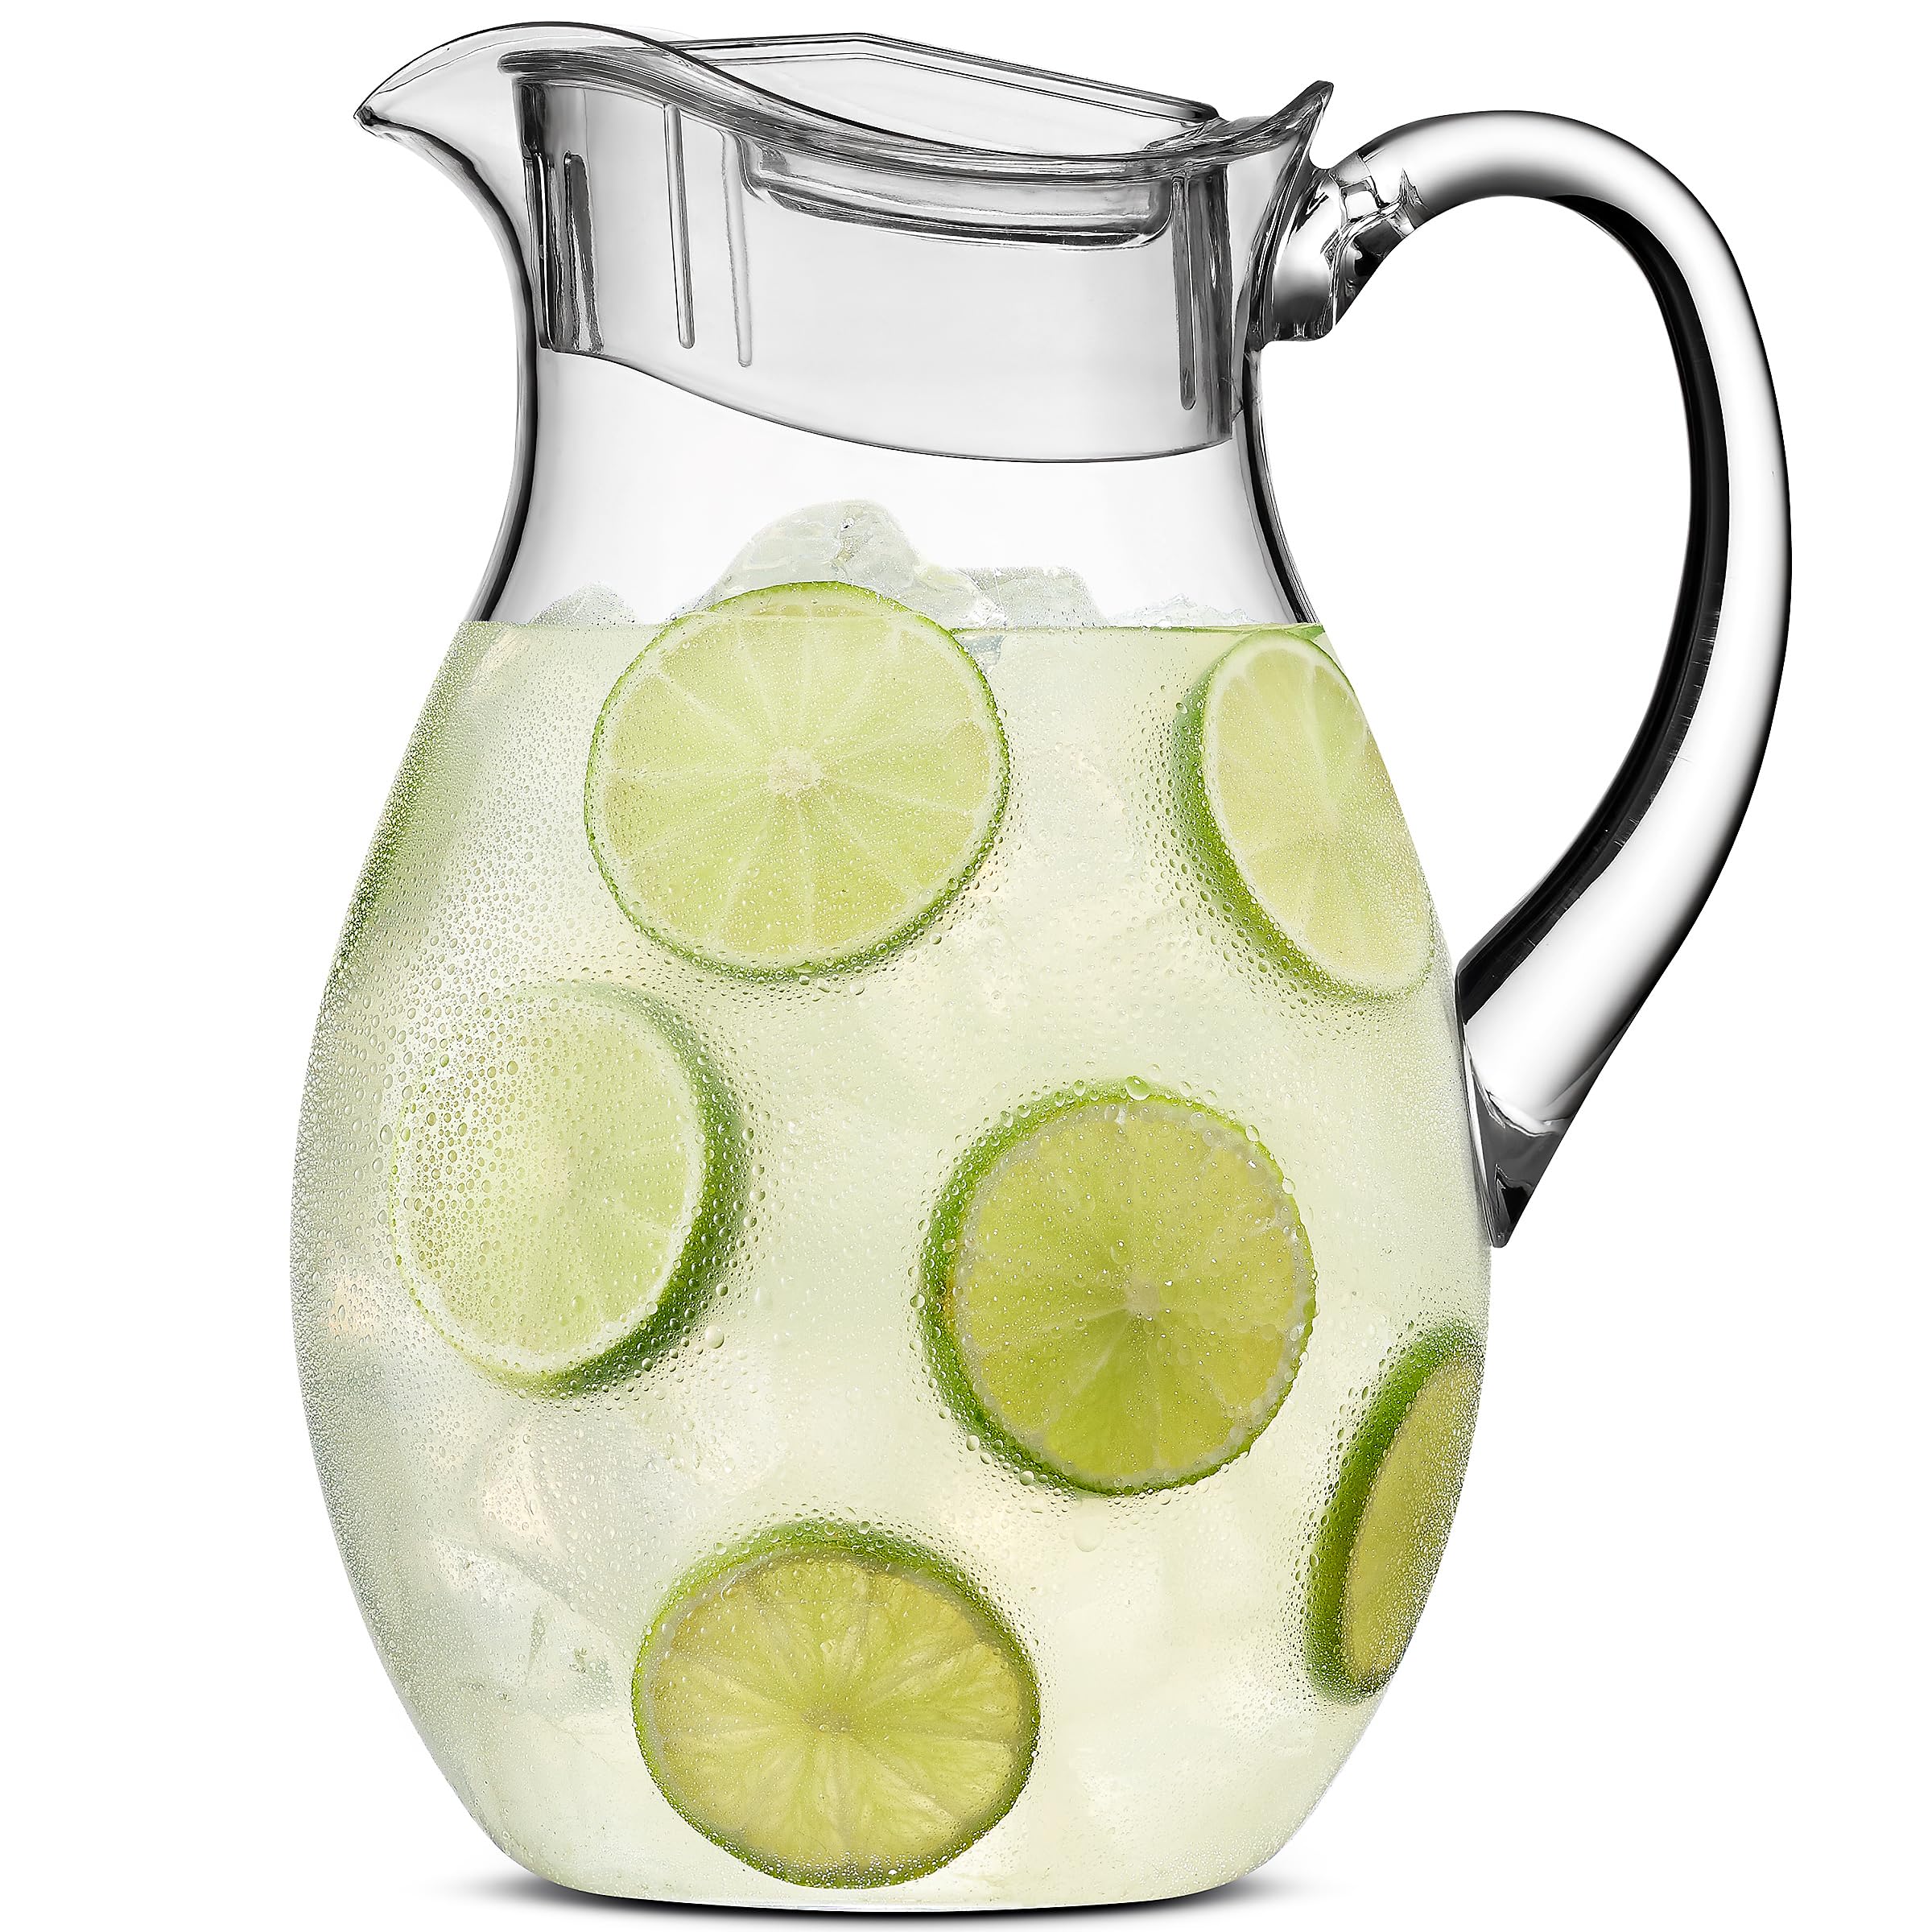 MosJos Acrylic Pitcher (72 oz), Clear Plastic, Water Pitcher with Lid, Shatterproof, BPA-Free Clear Pitcher, Ideal for Sangria, Lemonade, Juice, Iced Tea & More (Clear)  - Like New